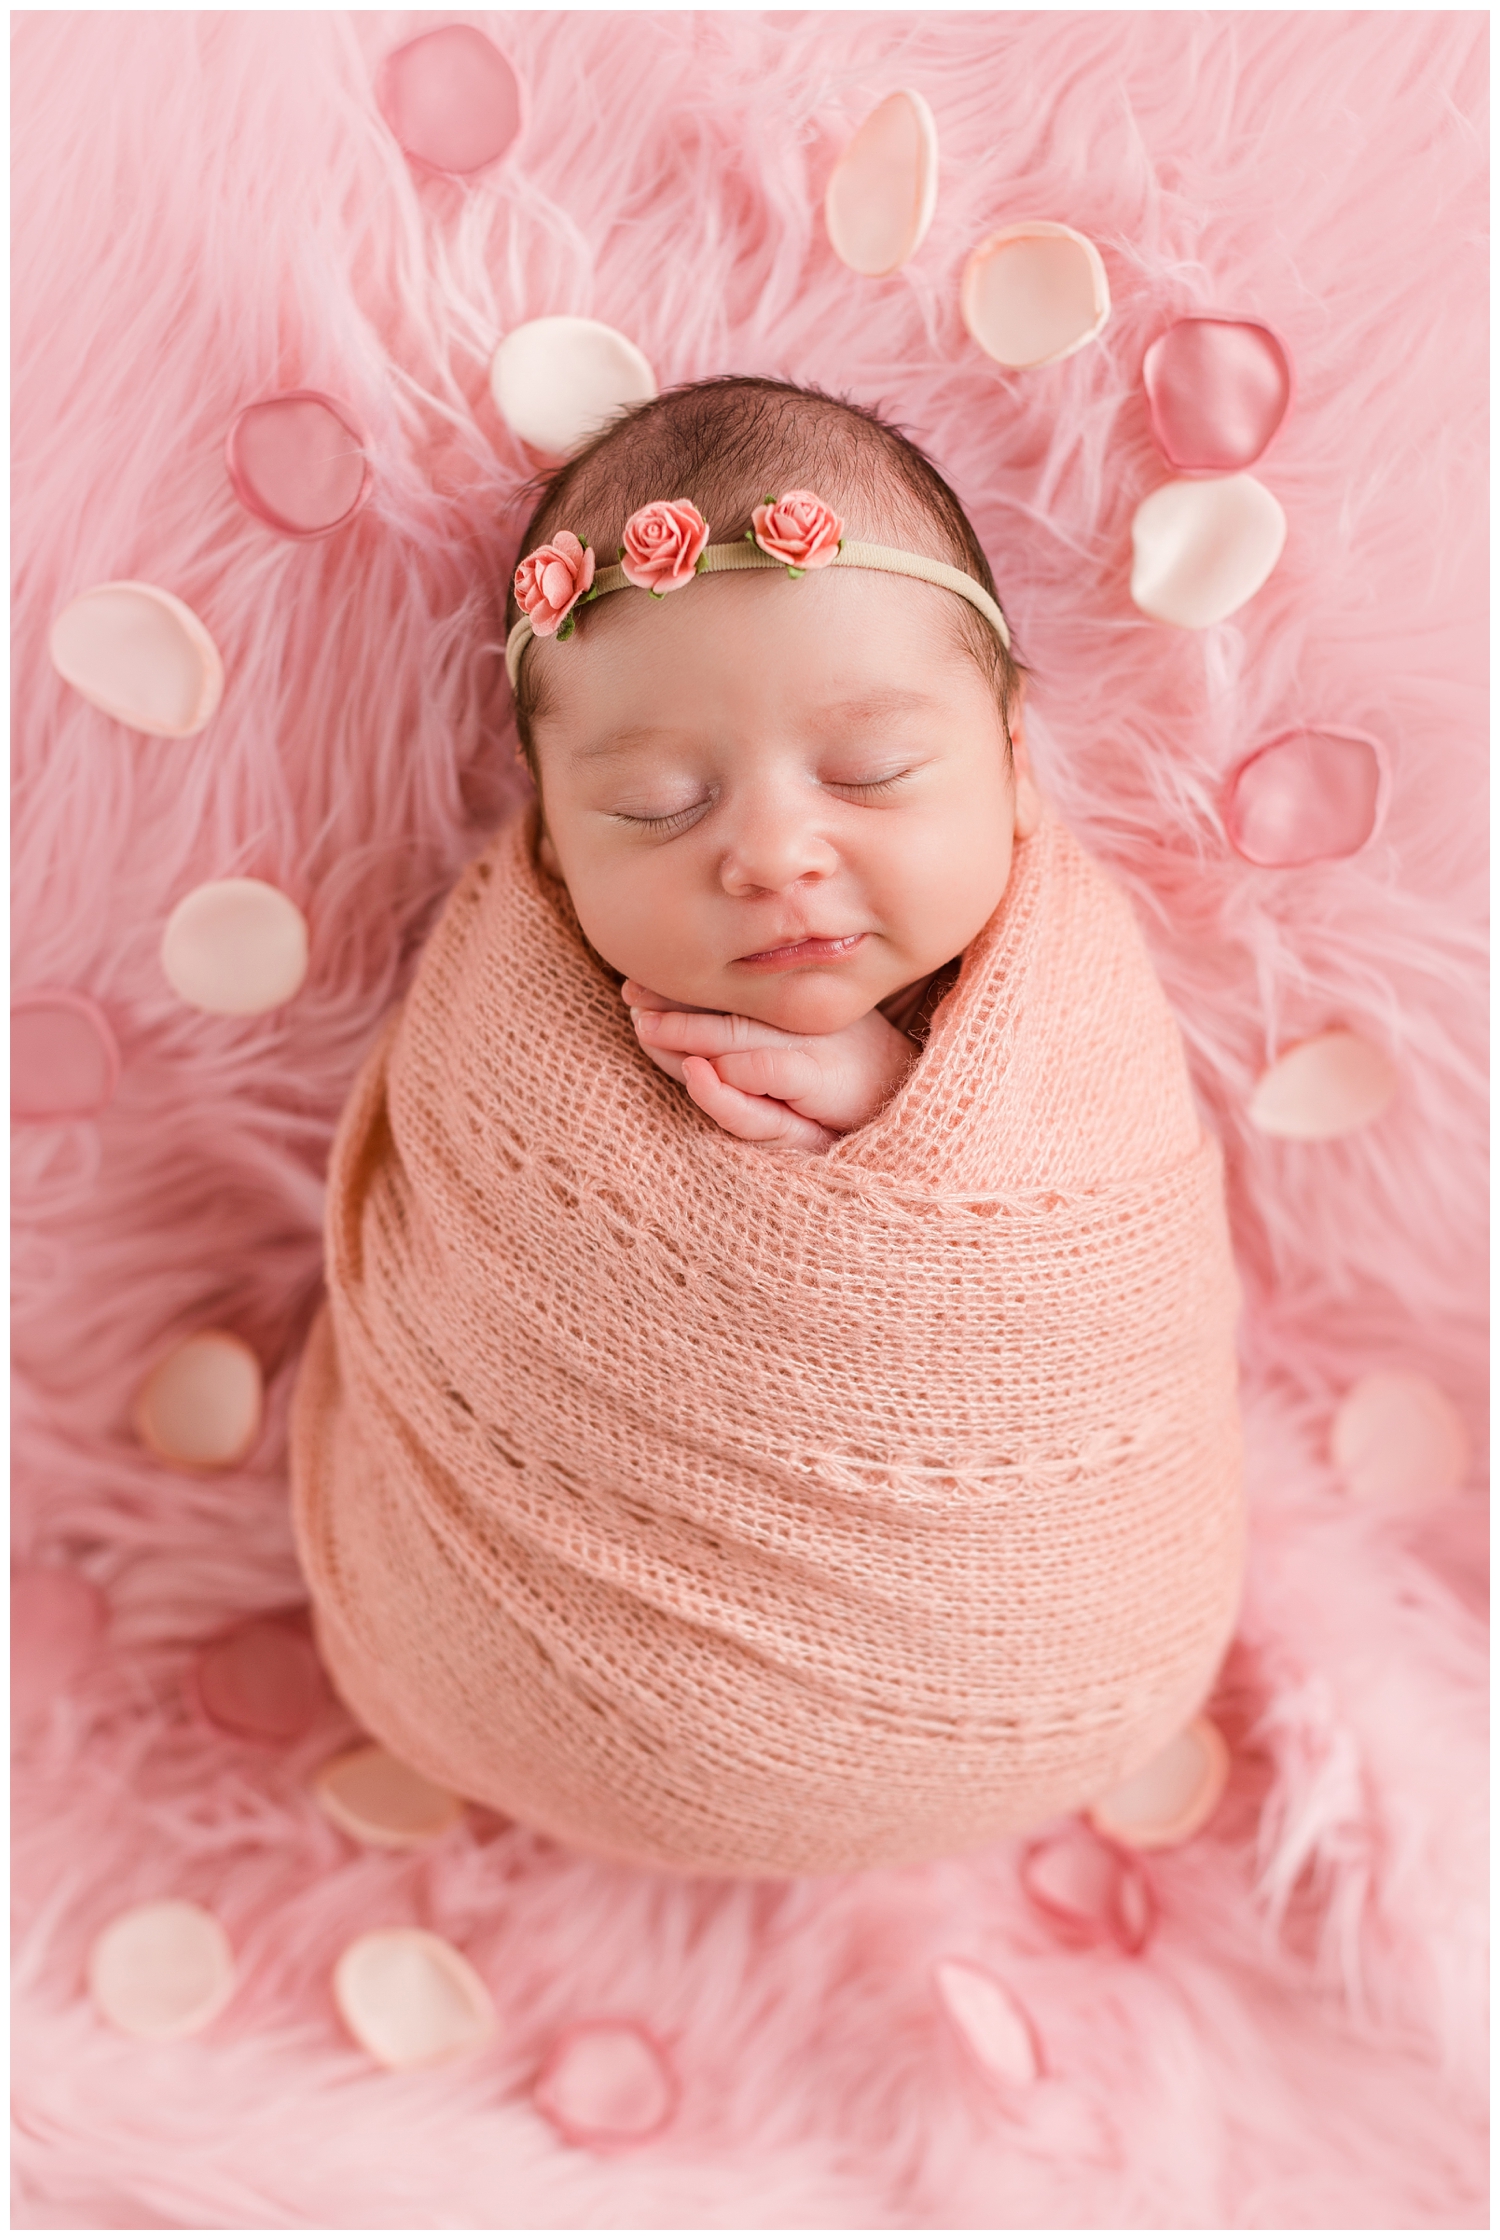 Baby Hazel dreaming sweetly all wrapped in pink and surrounded by rose petals | CB Studio